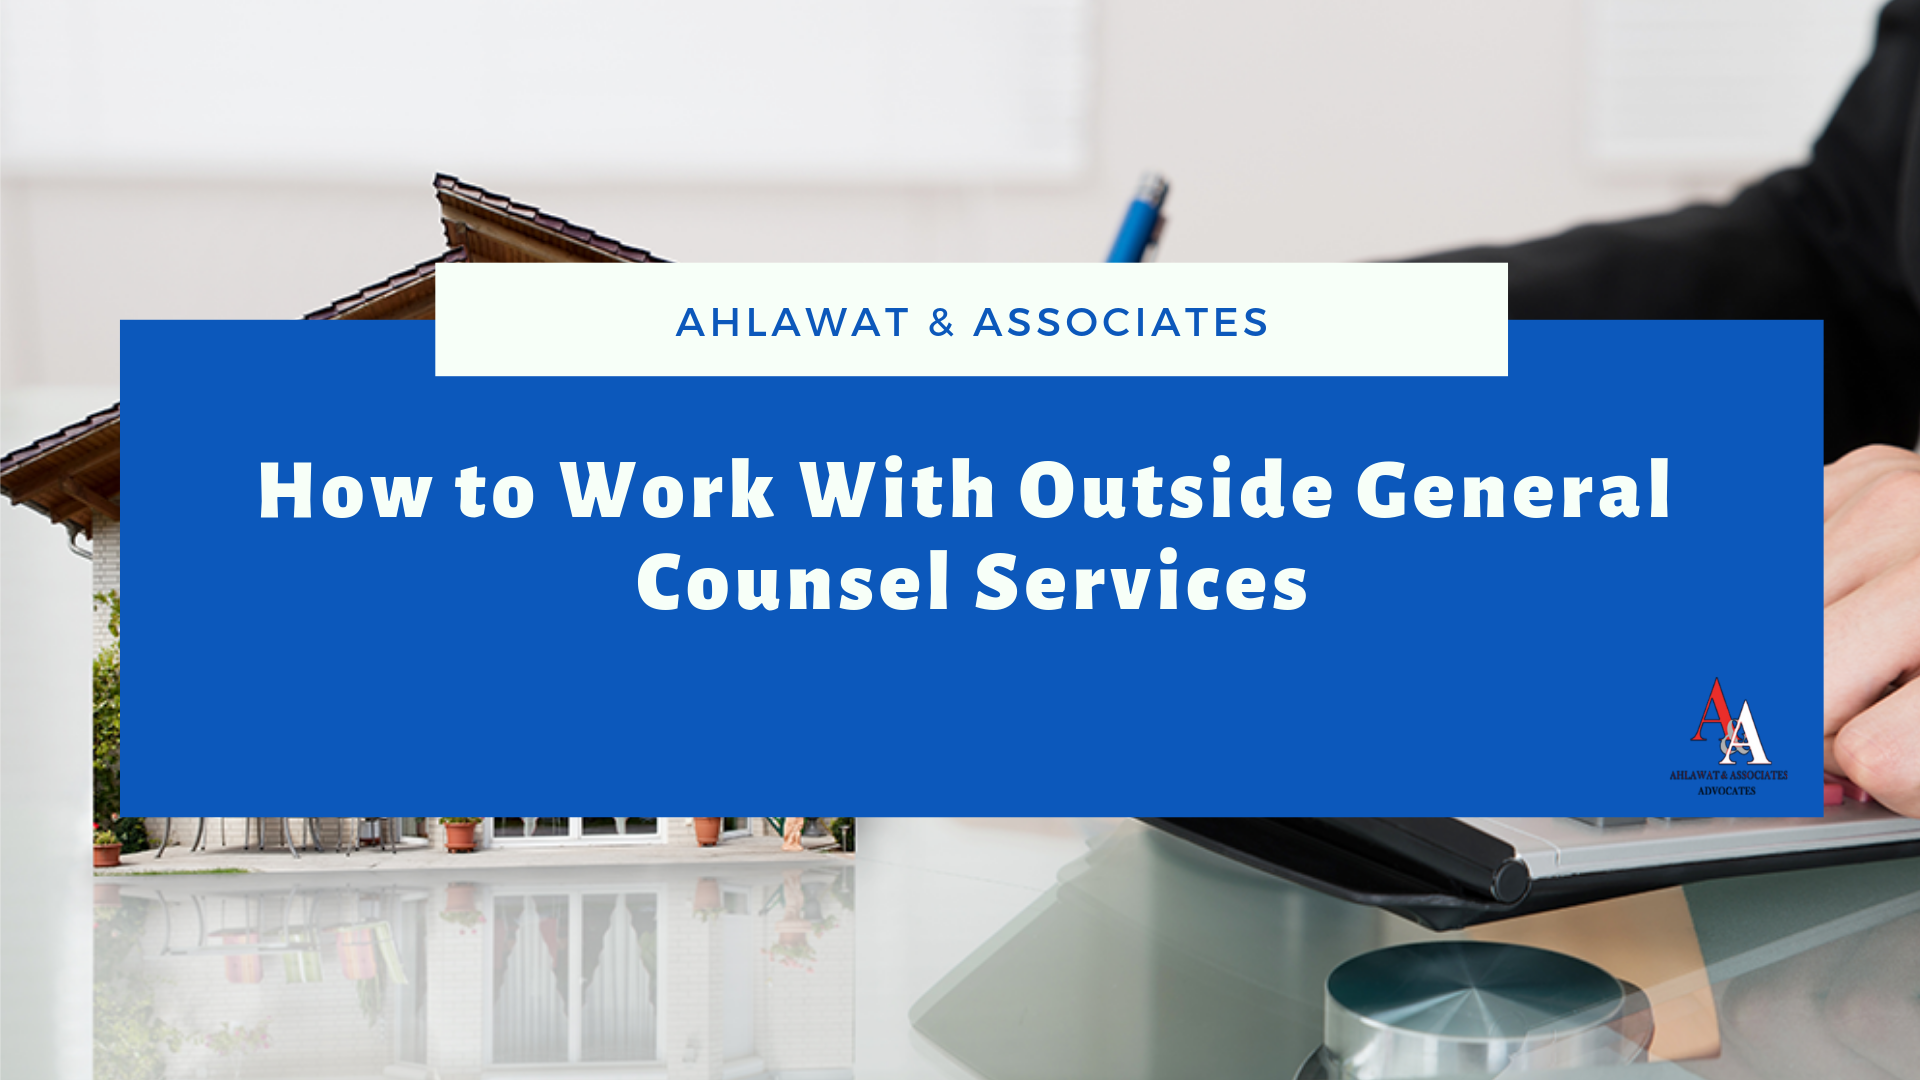 How to Work With Outside General Counsel Services